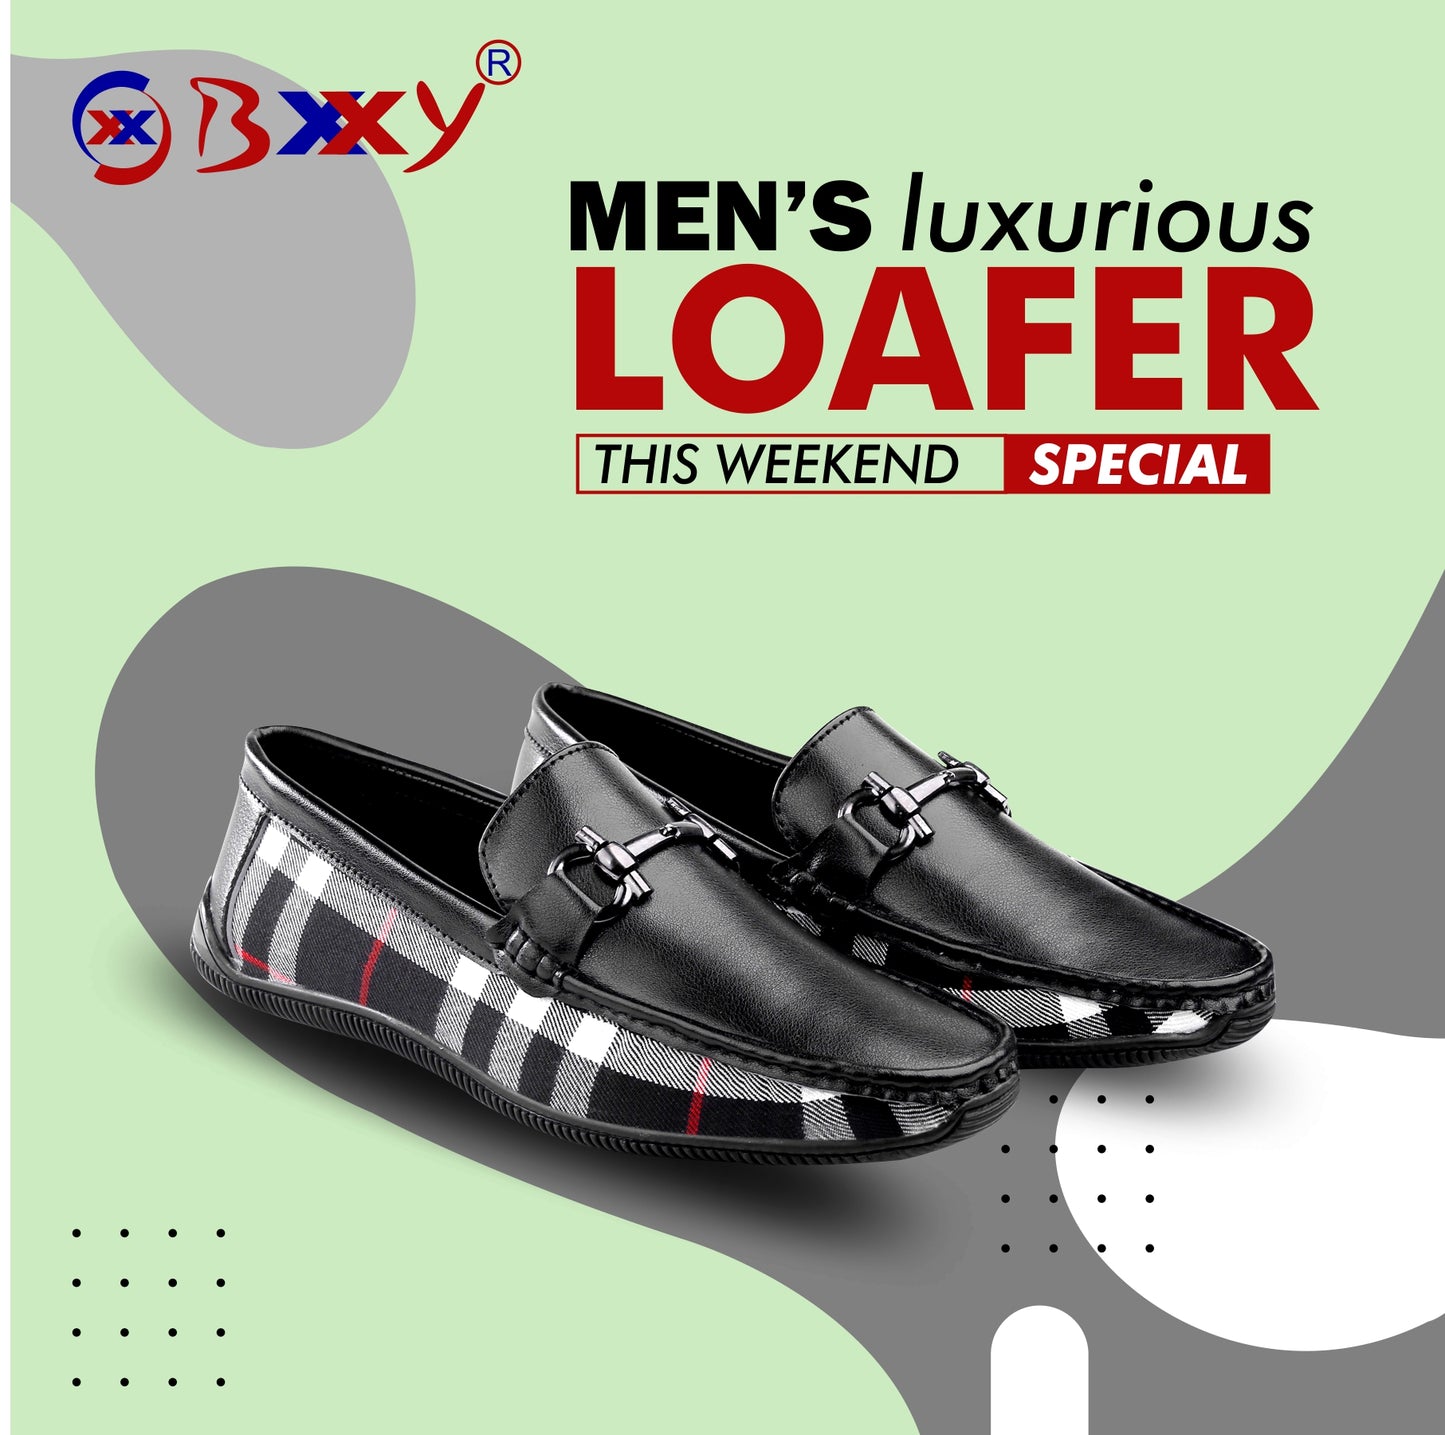 Men's Vegan Leather Fashionable Buckle Loafers for All Seasons